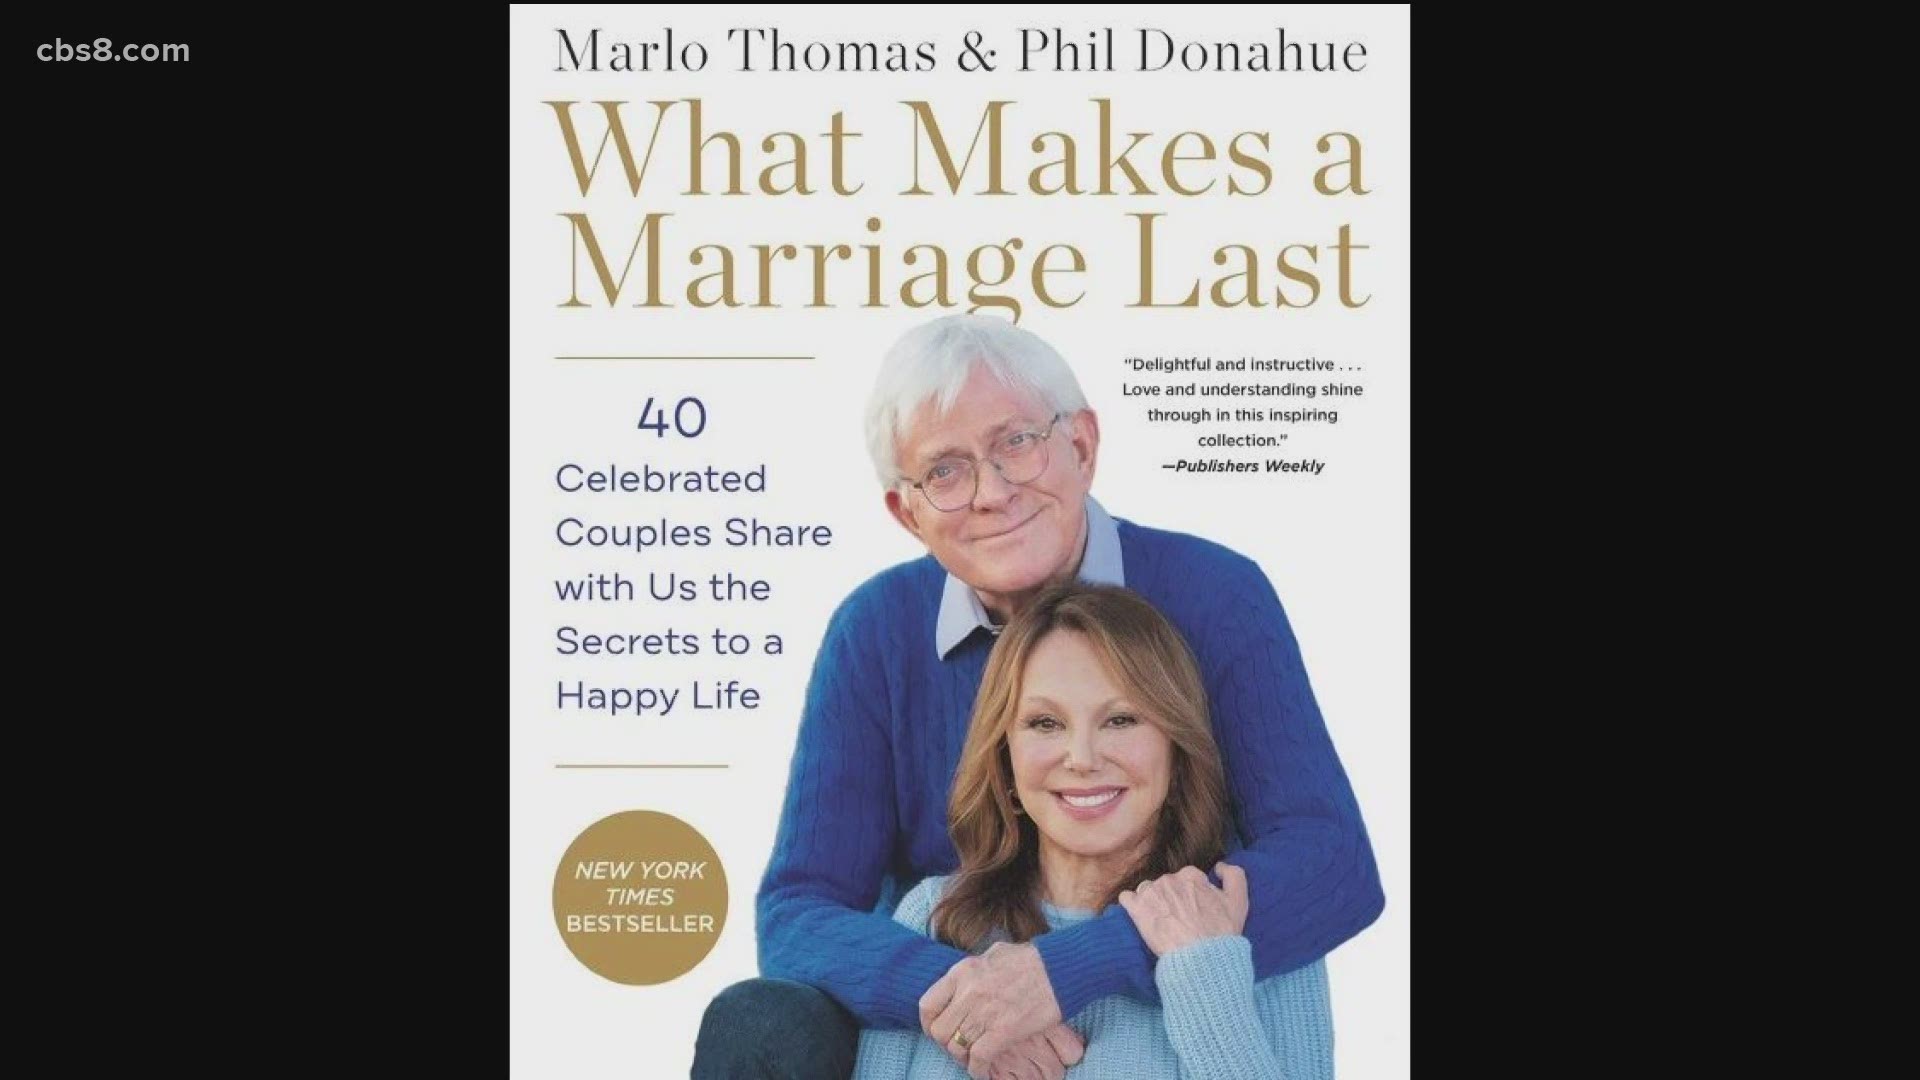 Former TV talk show host, Phil Donahue and his wife, Marlo Thomas, talk about their new book, "What Makes a Marriage Last".